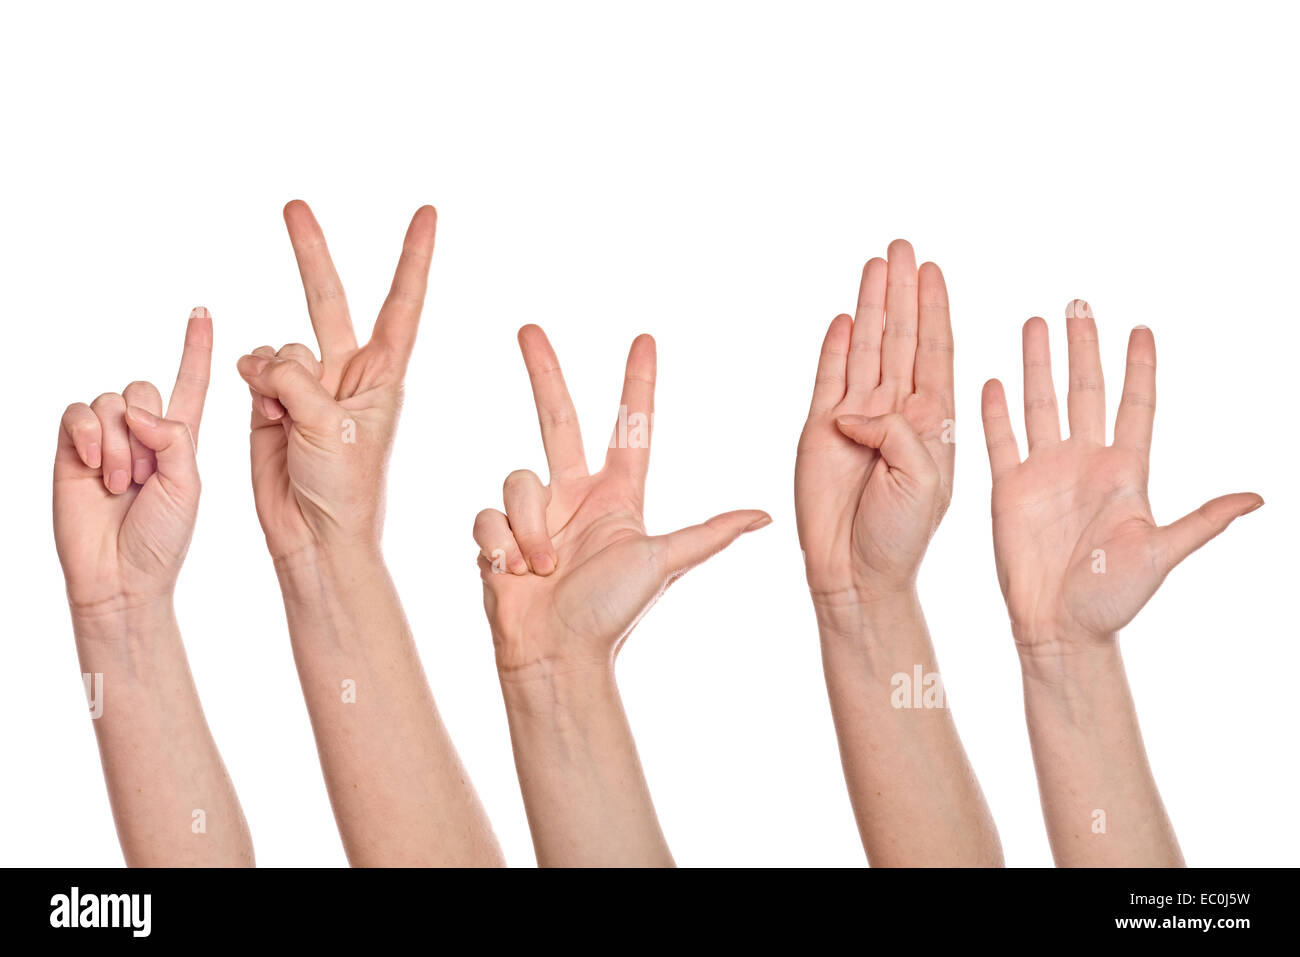 Caucasian white female hands counting from one to five fingers, isolated on white background. Stock Photo